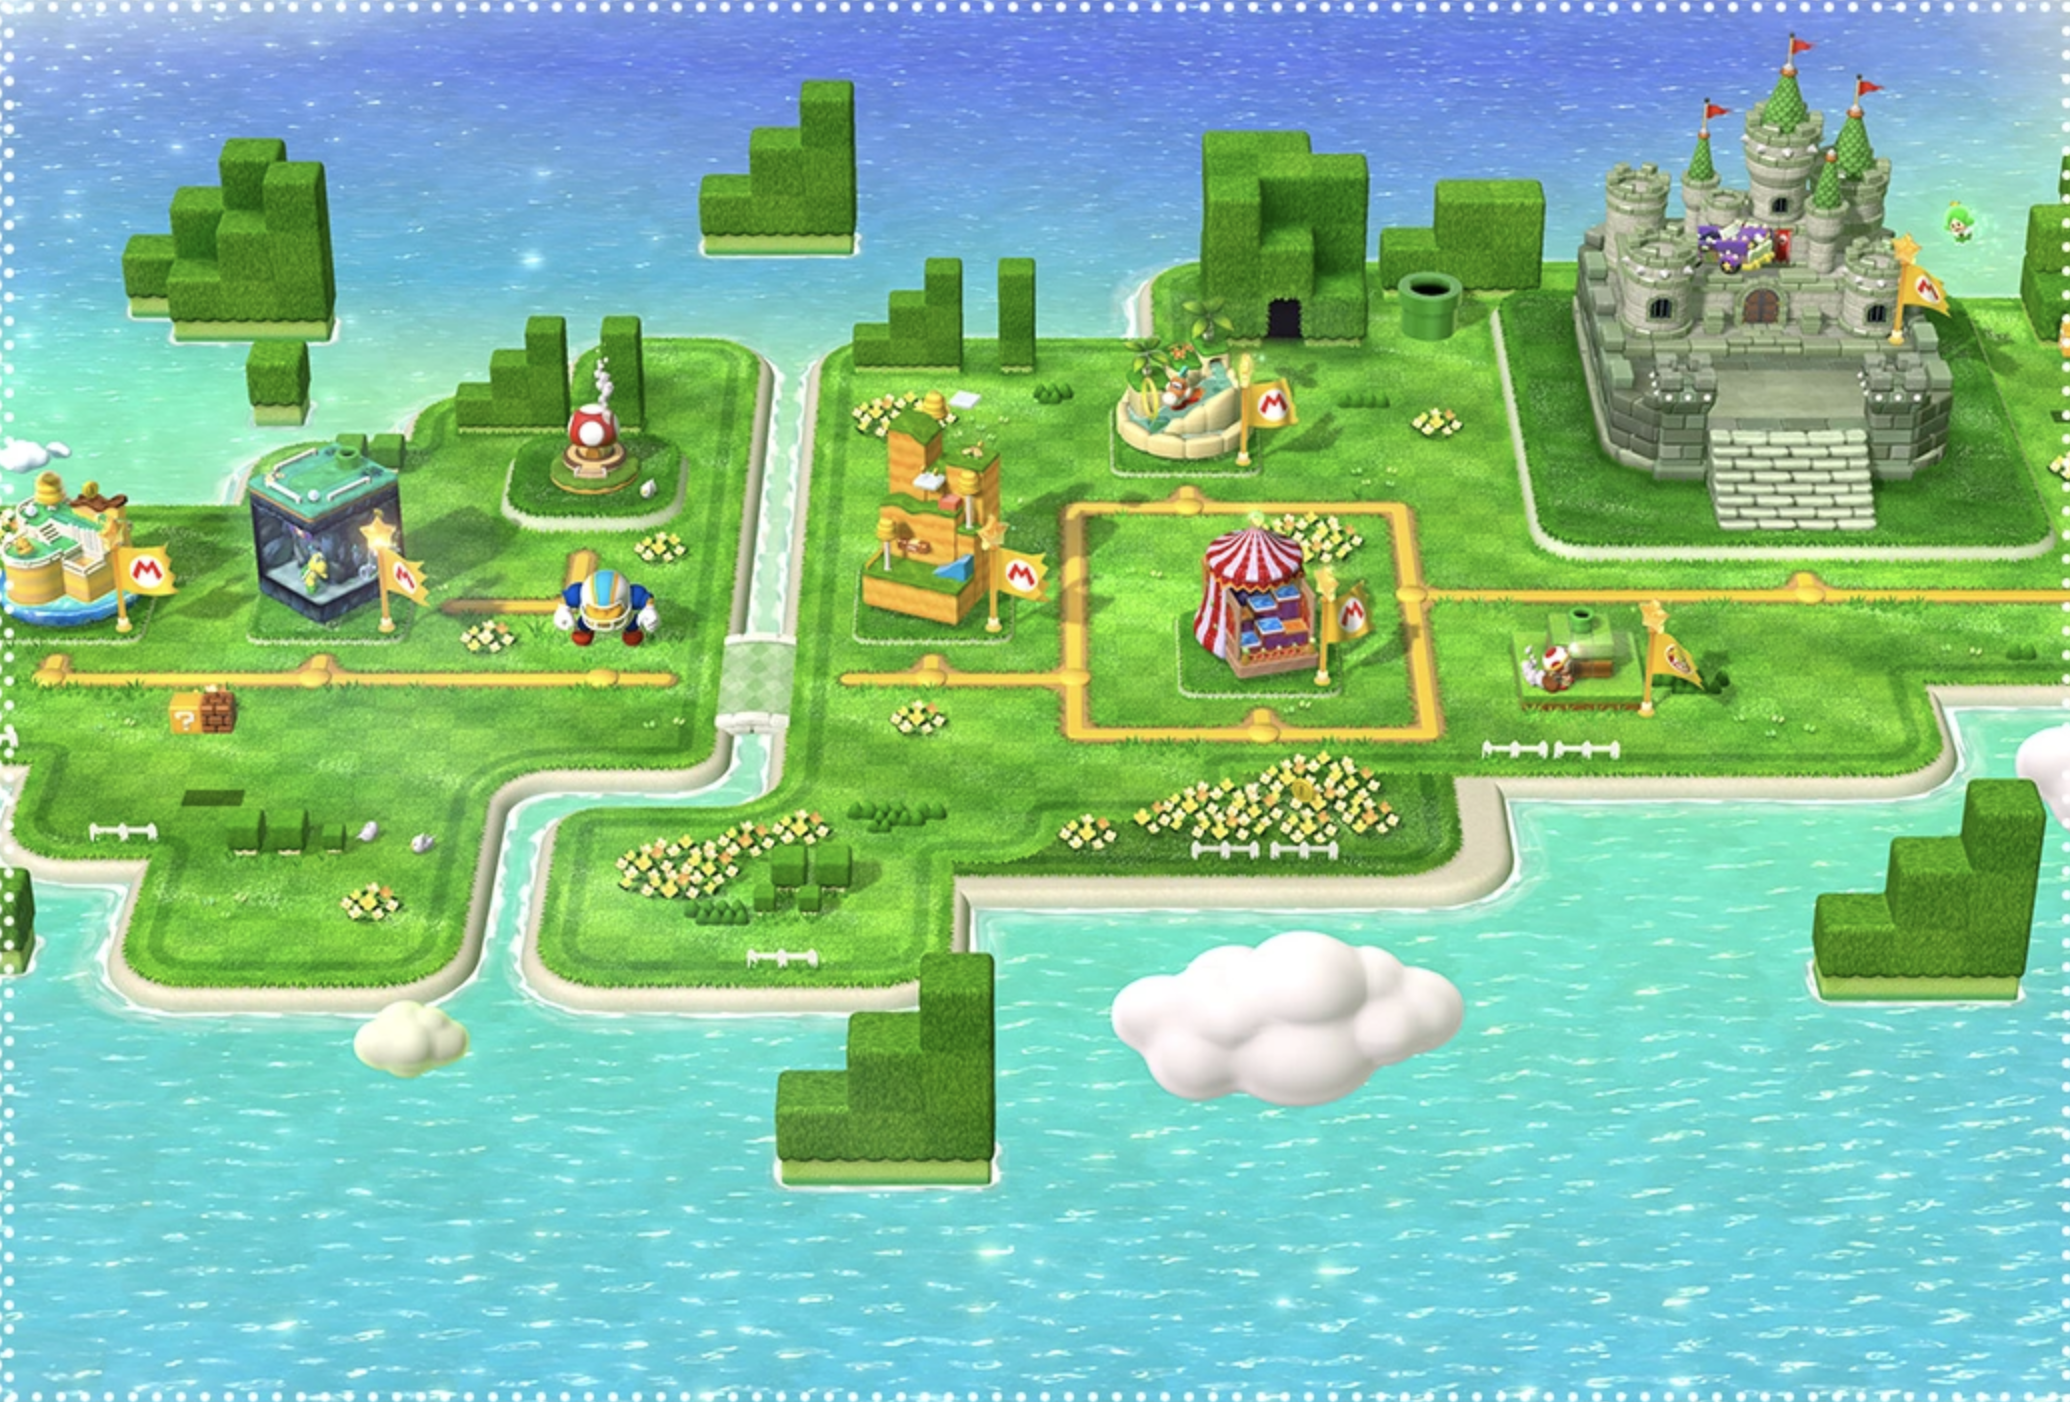 This image shows a view of the entire first world of Super Mario 3d.